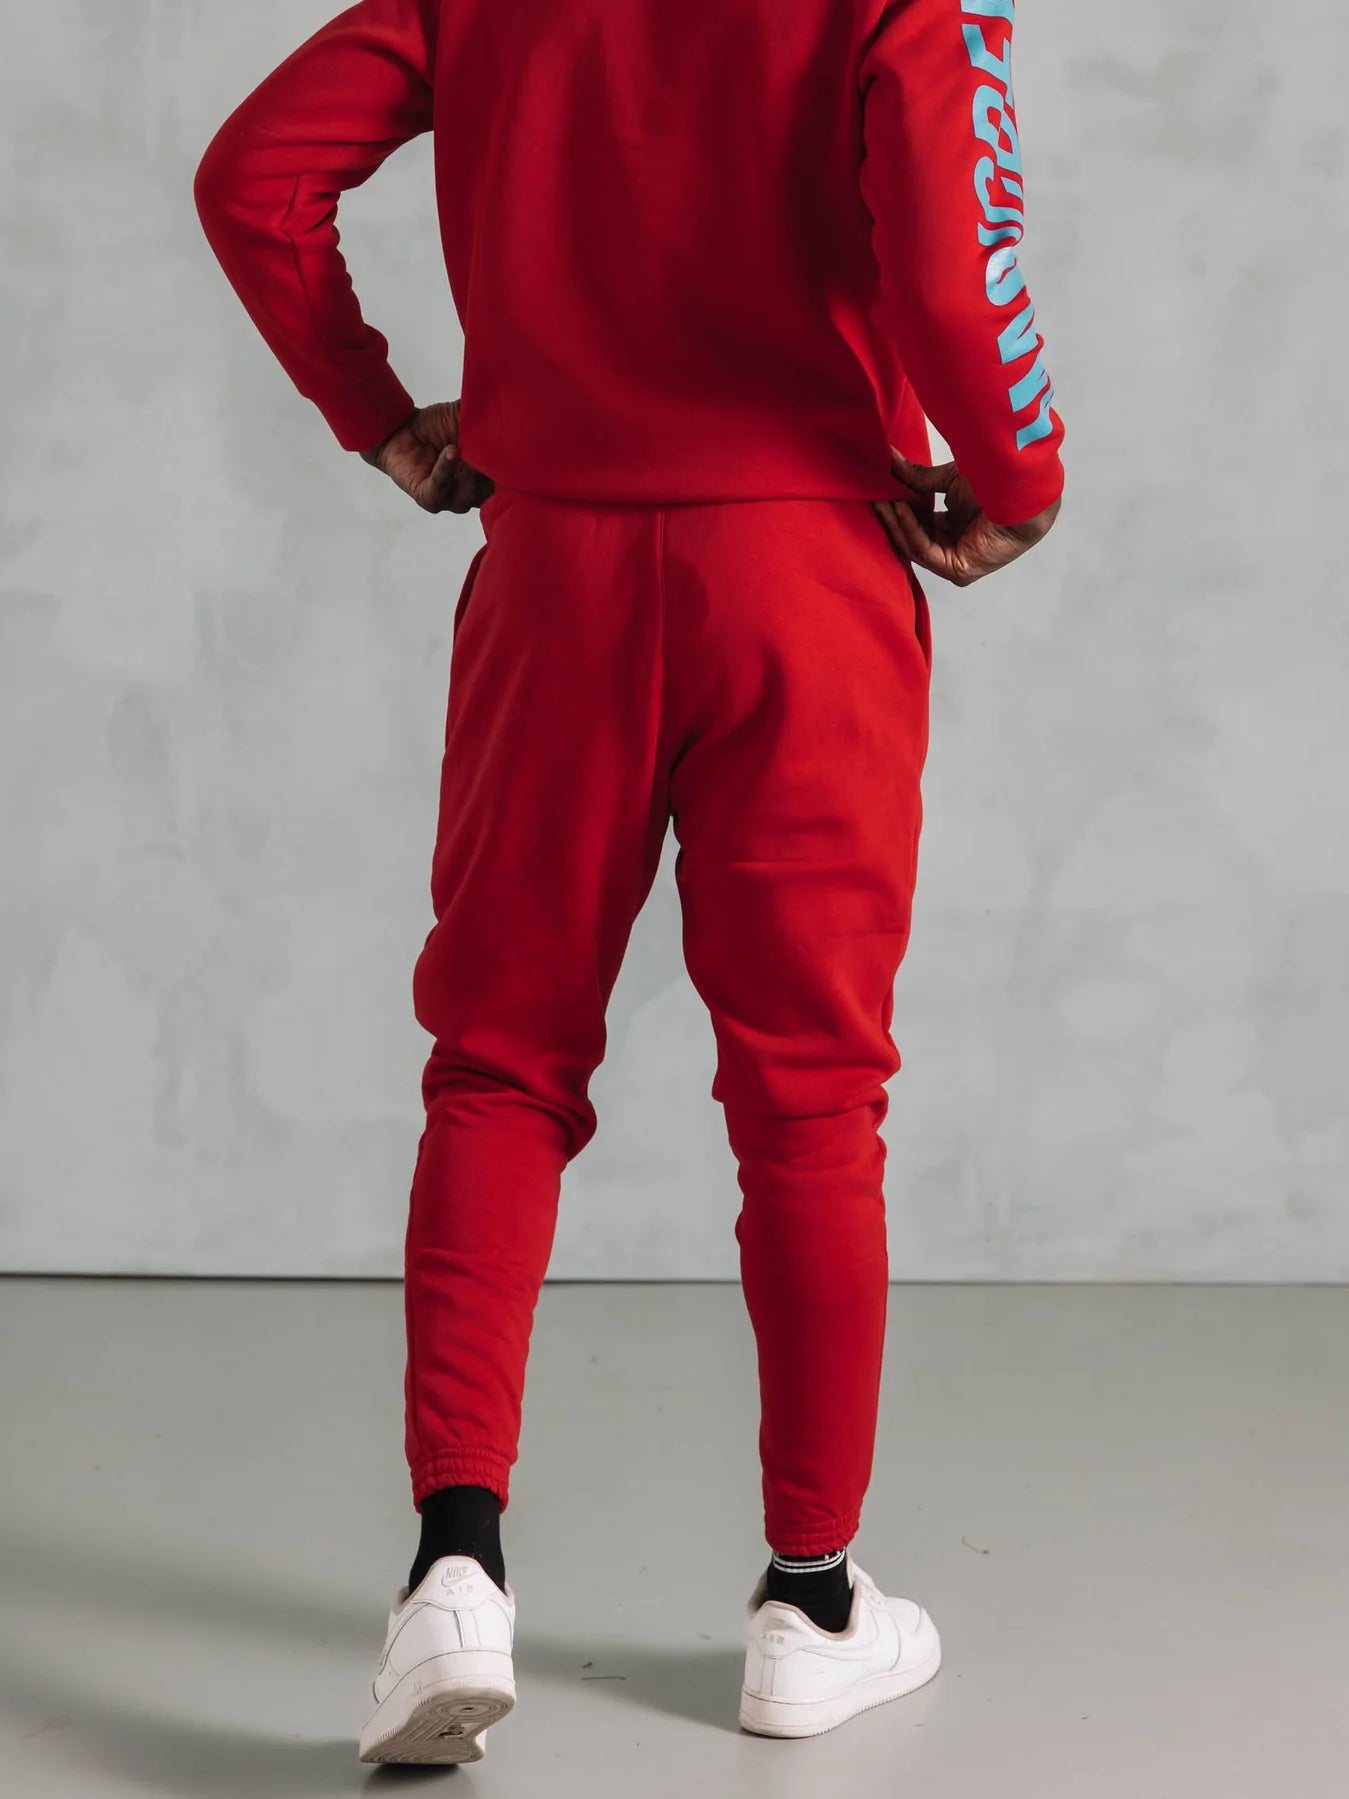 MAGICBEE CLASSIC PANTS - RED (7848239726850)